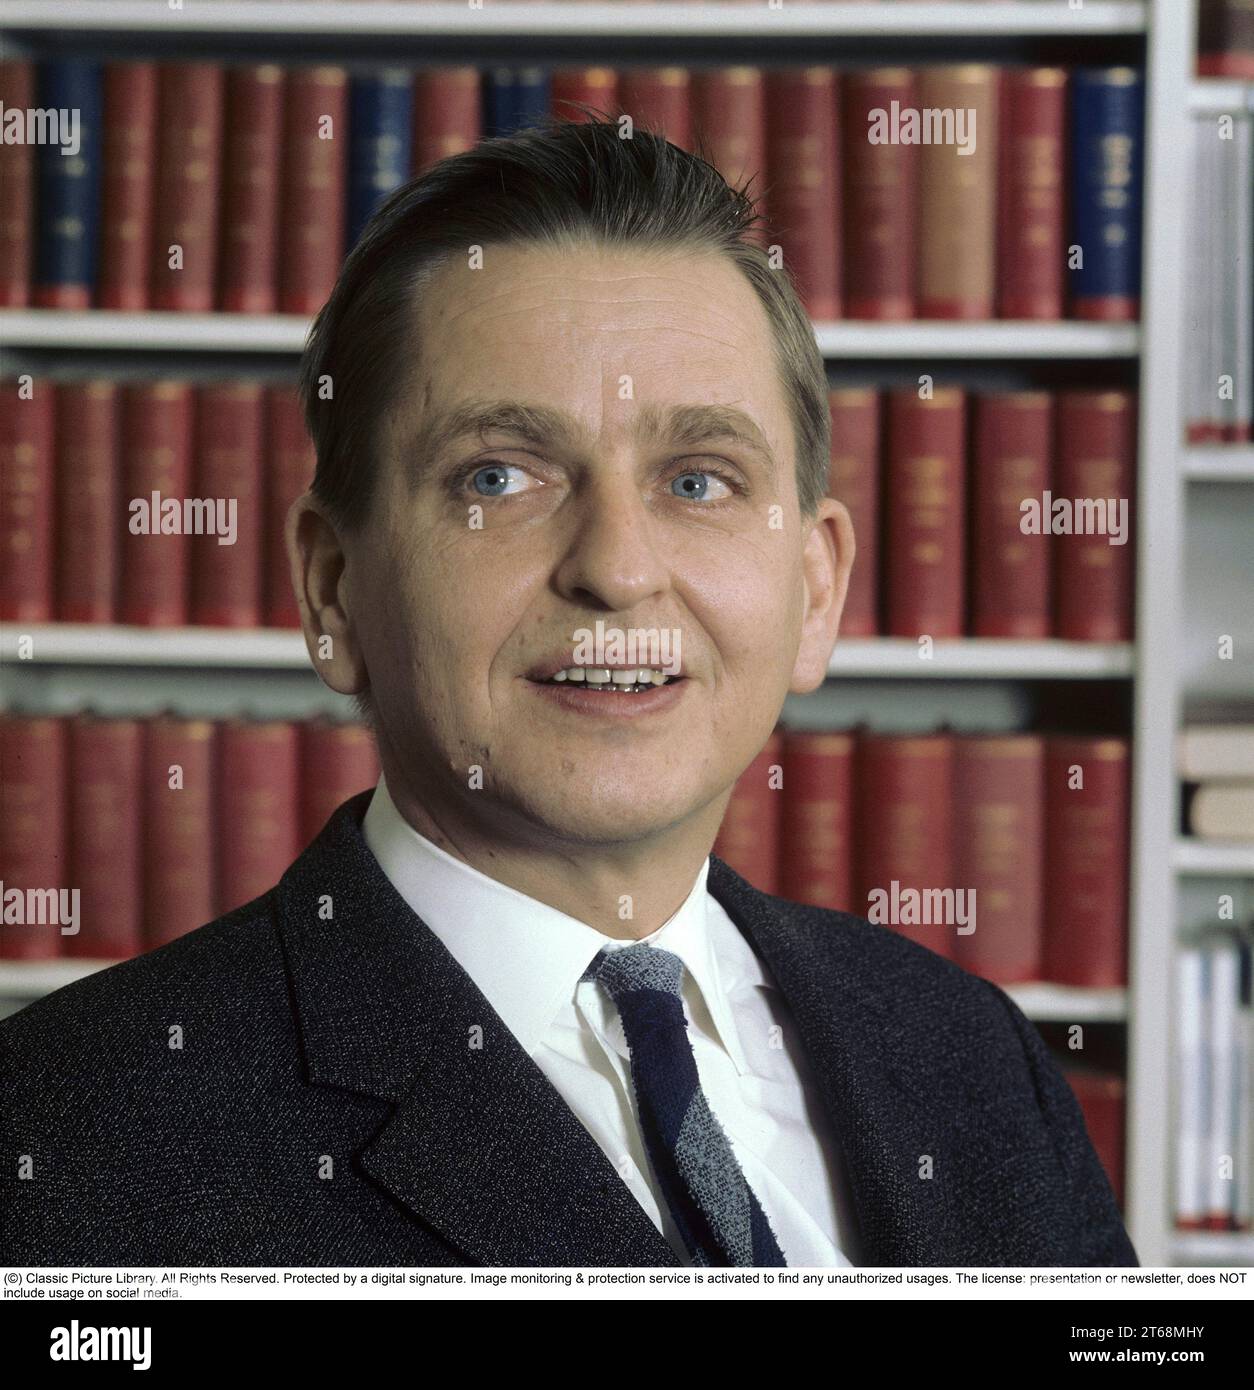 Olof Palme. Swedish social democratic politican and prime minister. Born october 14 1927. Murdered february 28 1985. Pictured here in on 18 april 1971 Stock Photo